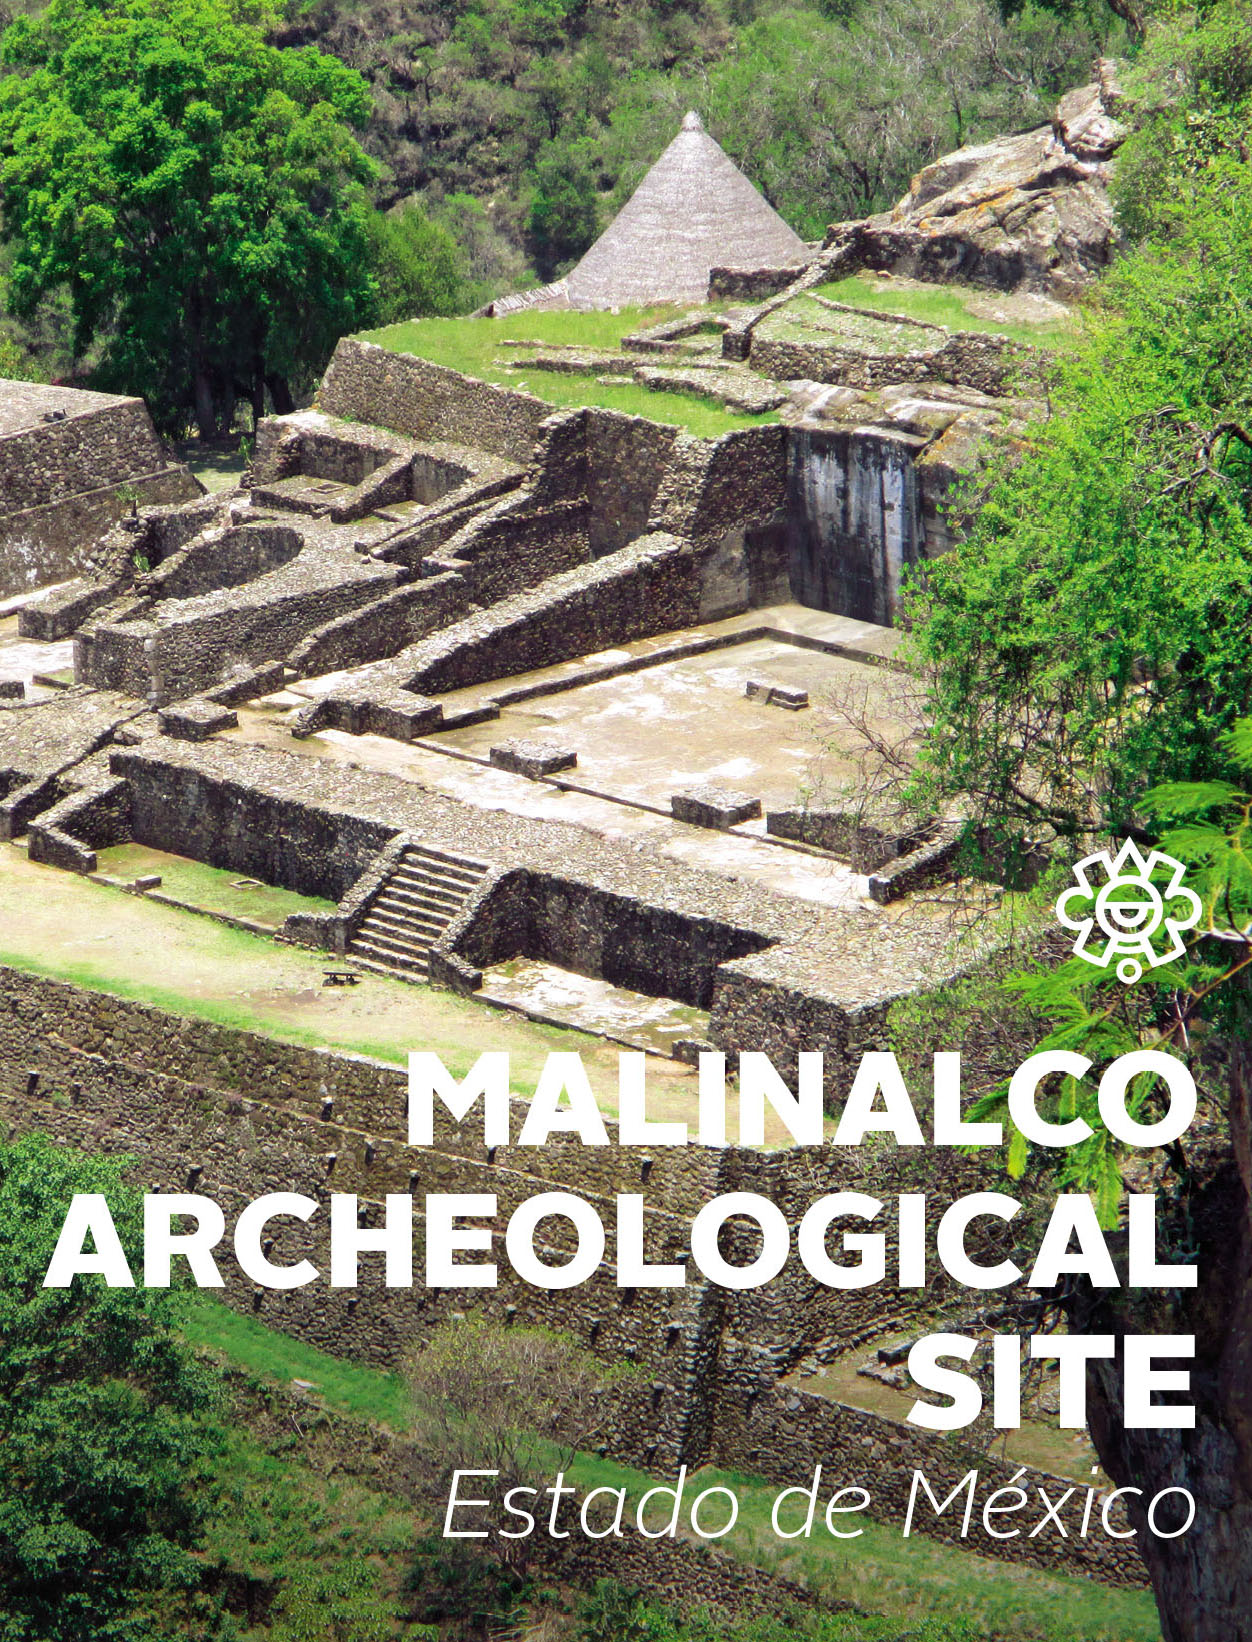 Malinalco Archeological Site